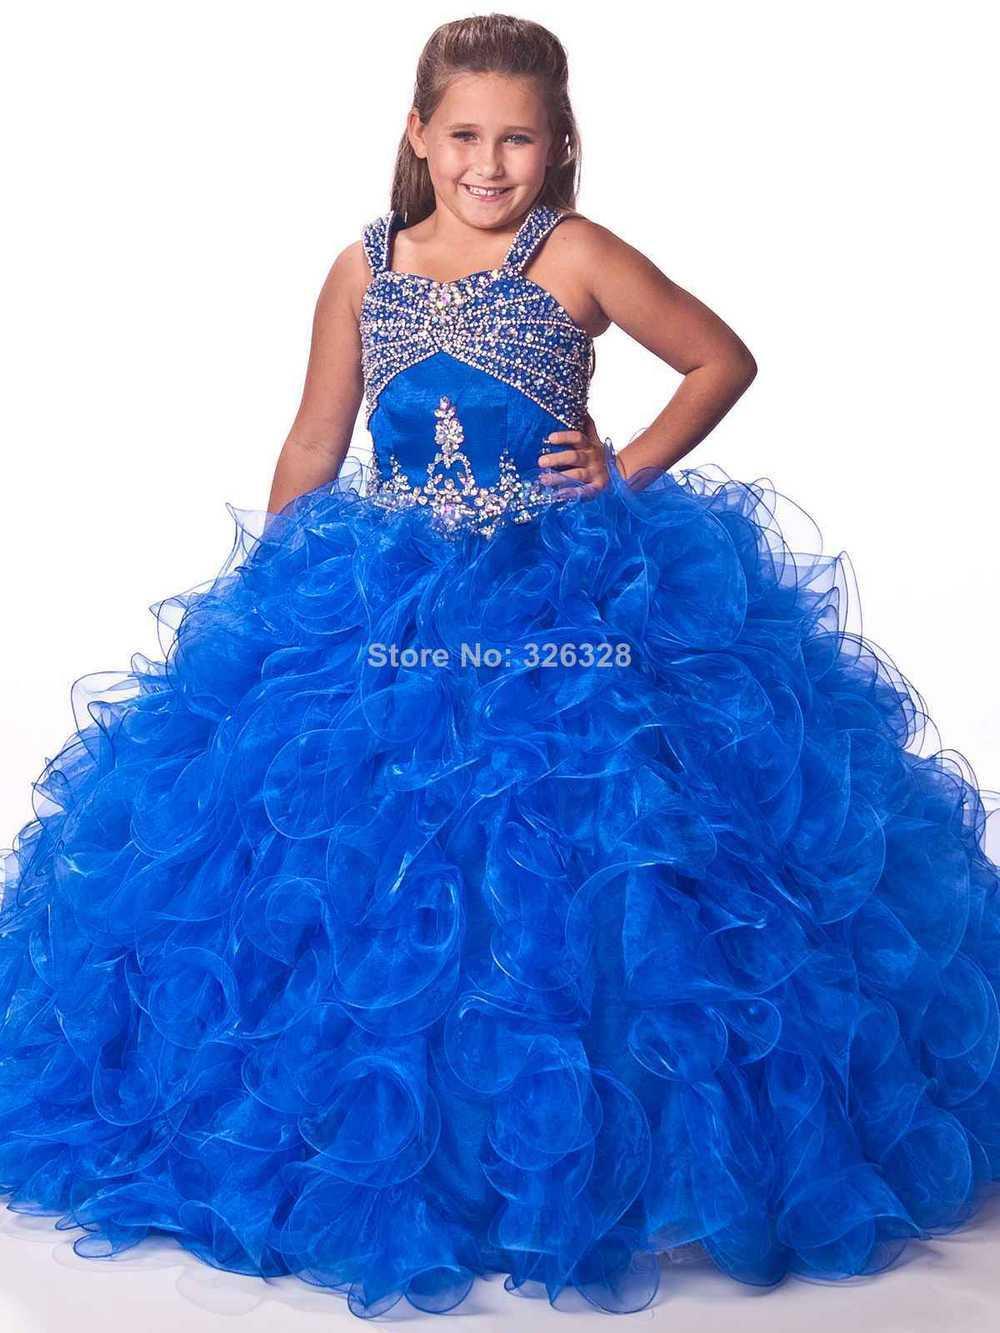 Collection Formal Dresses For Juniors Cheap Pictures - Reikian